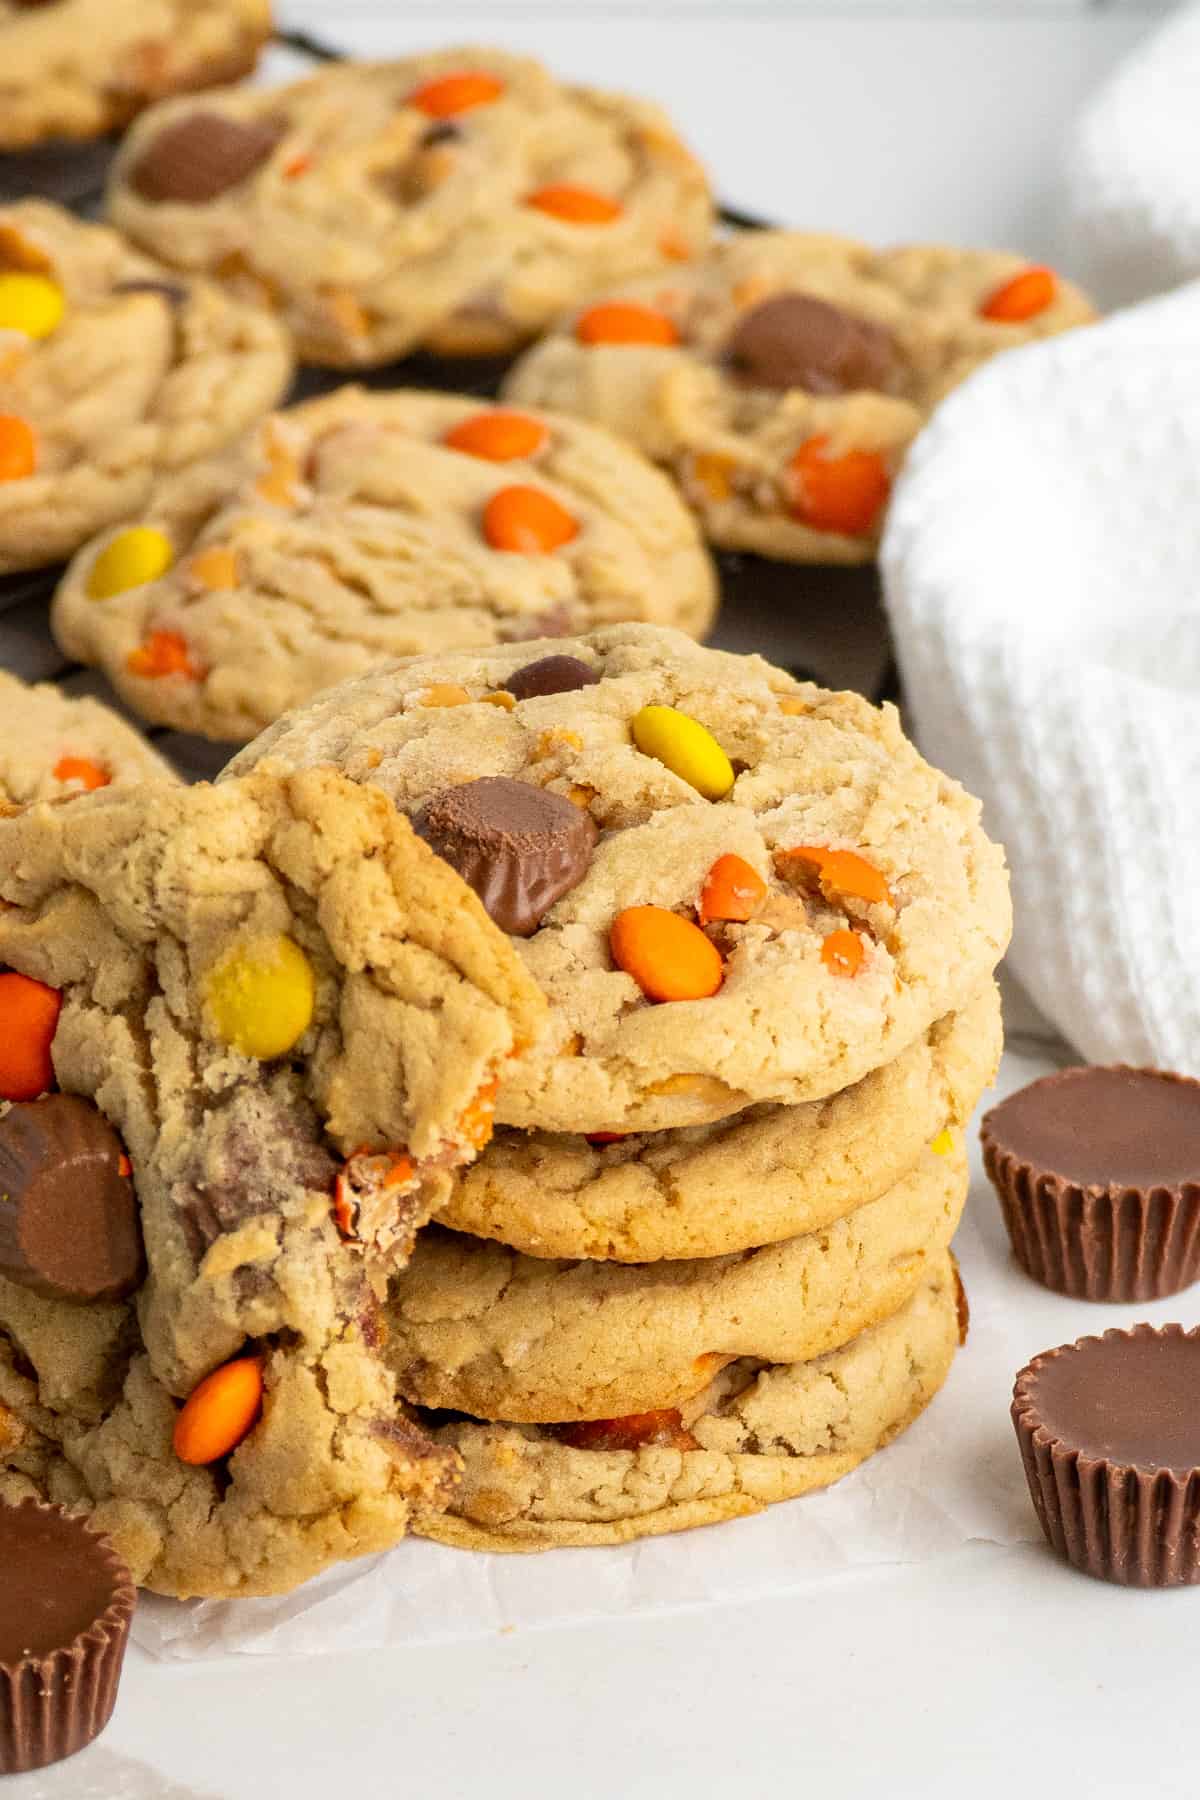 Four Reese's pieces cookies stacked on each other with one on the side with a bite taken out of it.